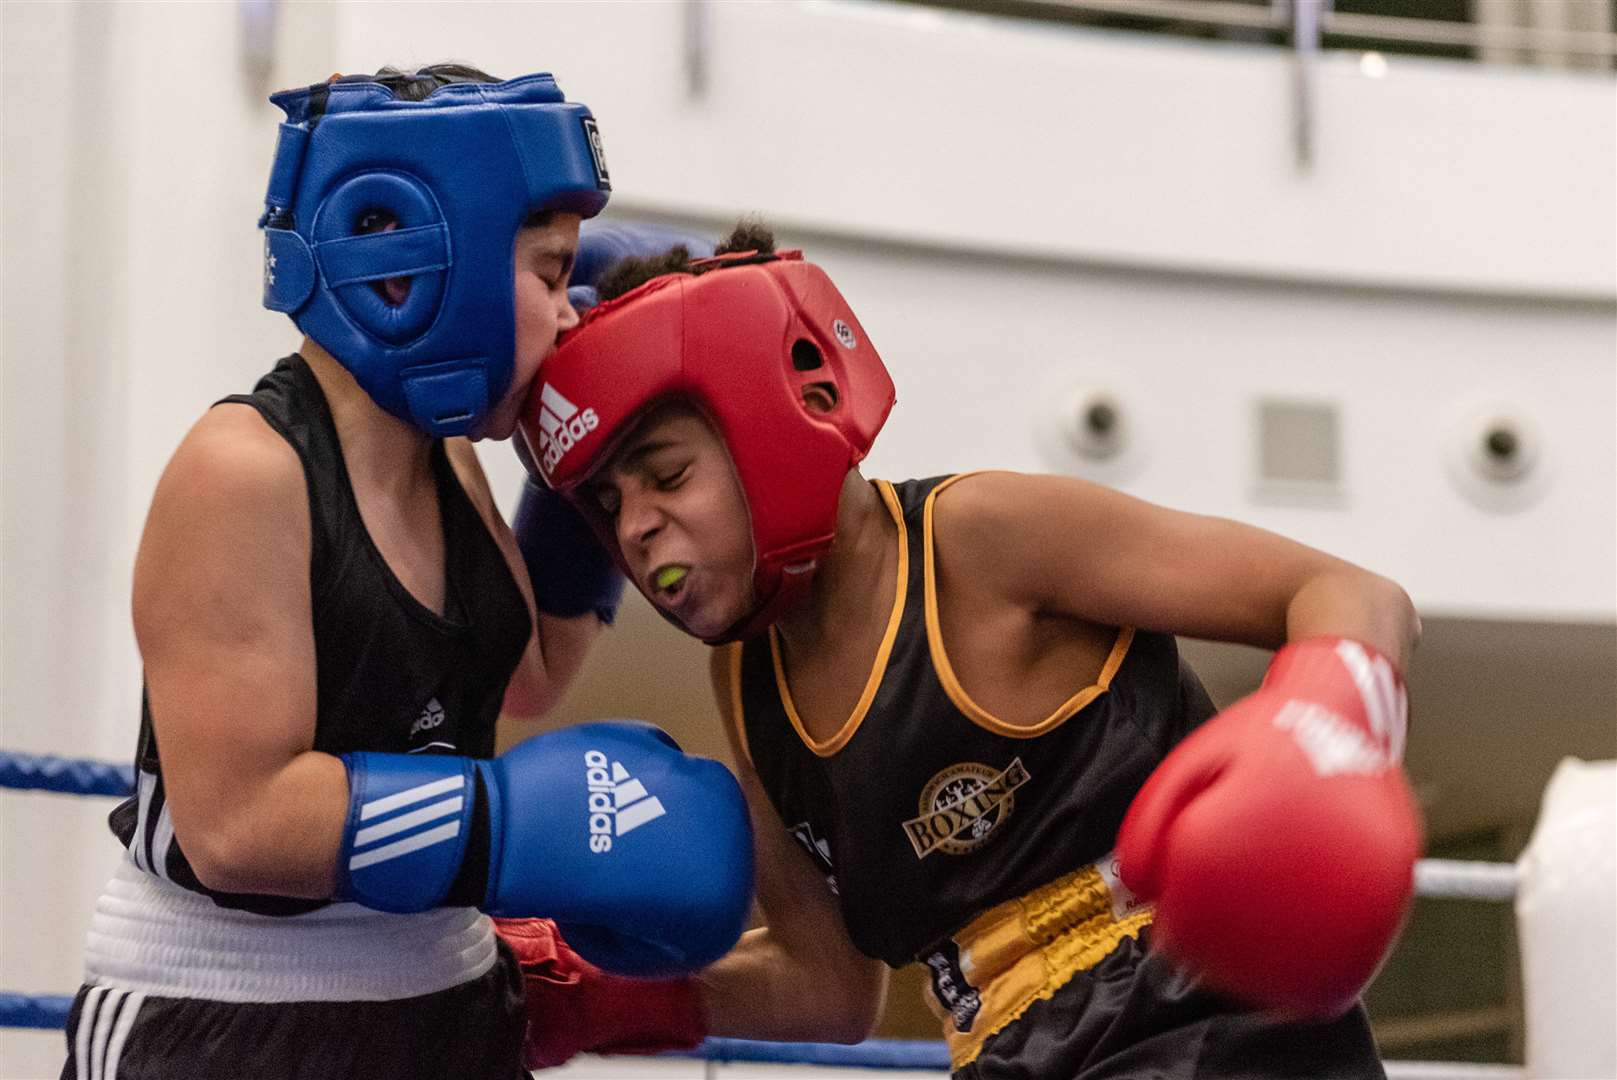 Sandwich Amateur Boxing Club's next show is tonight at Deal Welfare Club